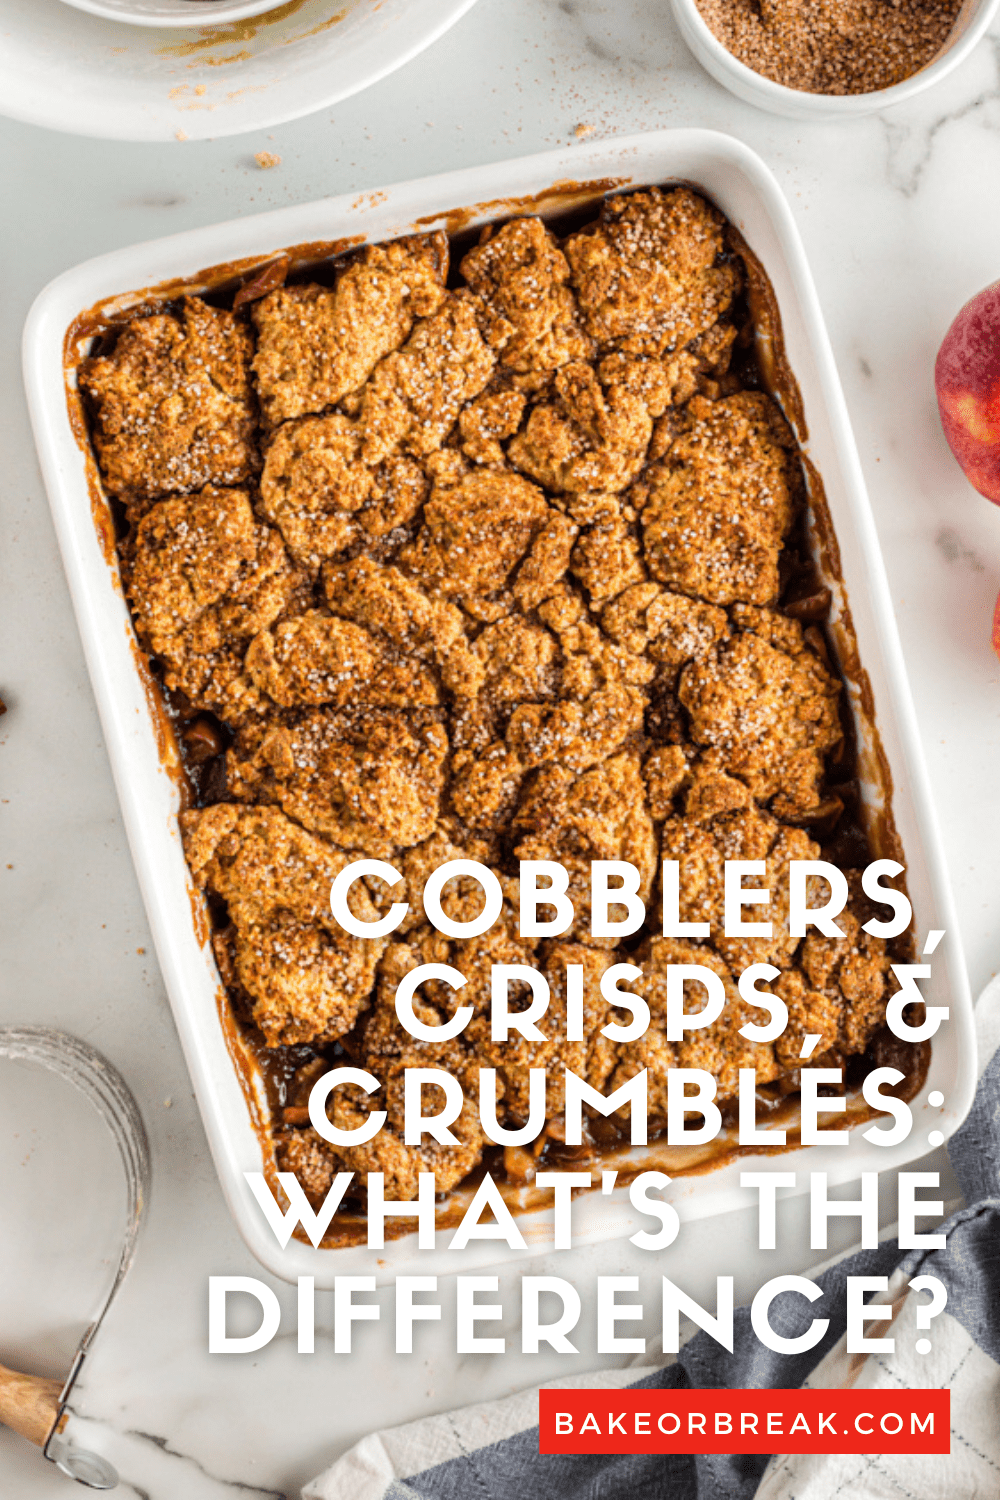 Cobblers, Crisps, & Crumbles: What's the Difference? bakeorbreak.com